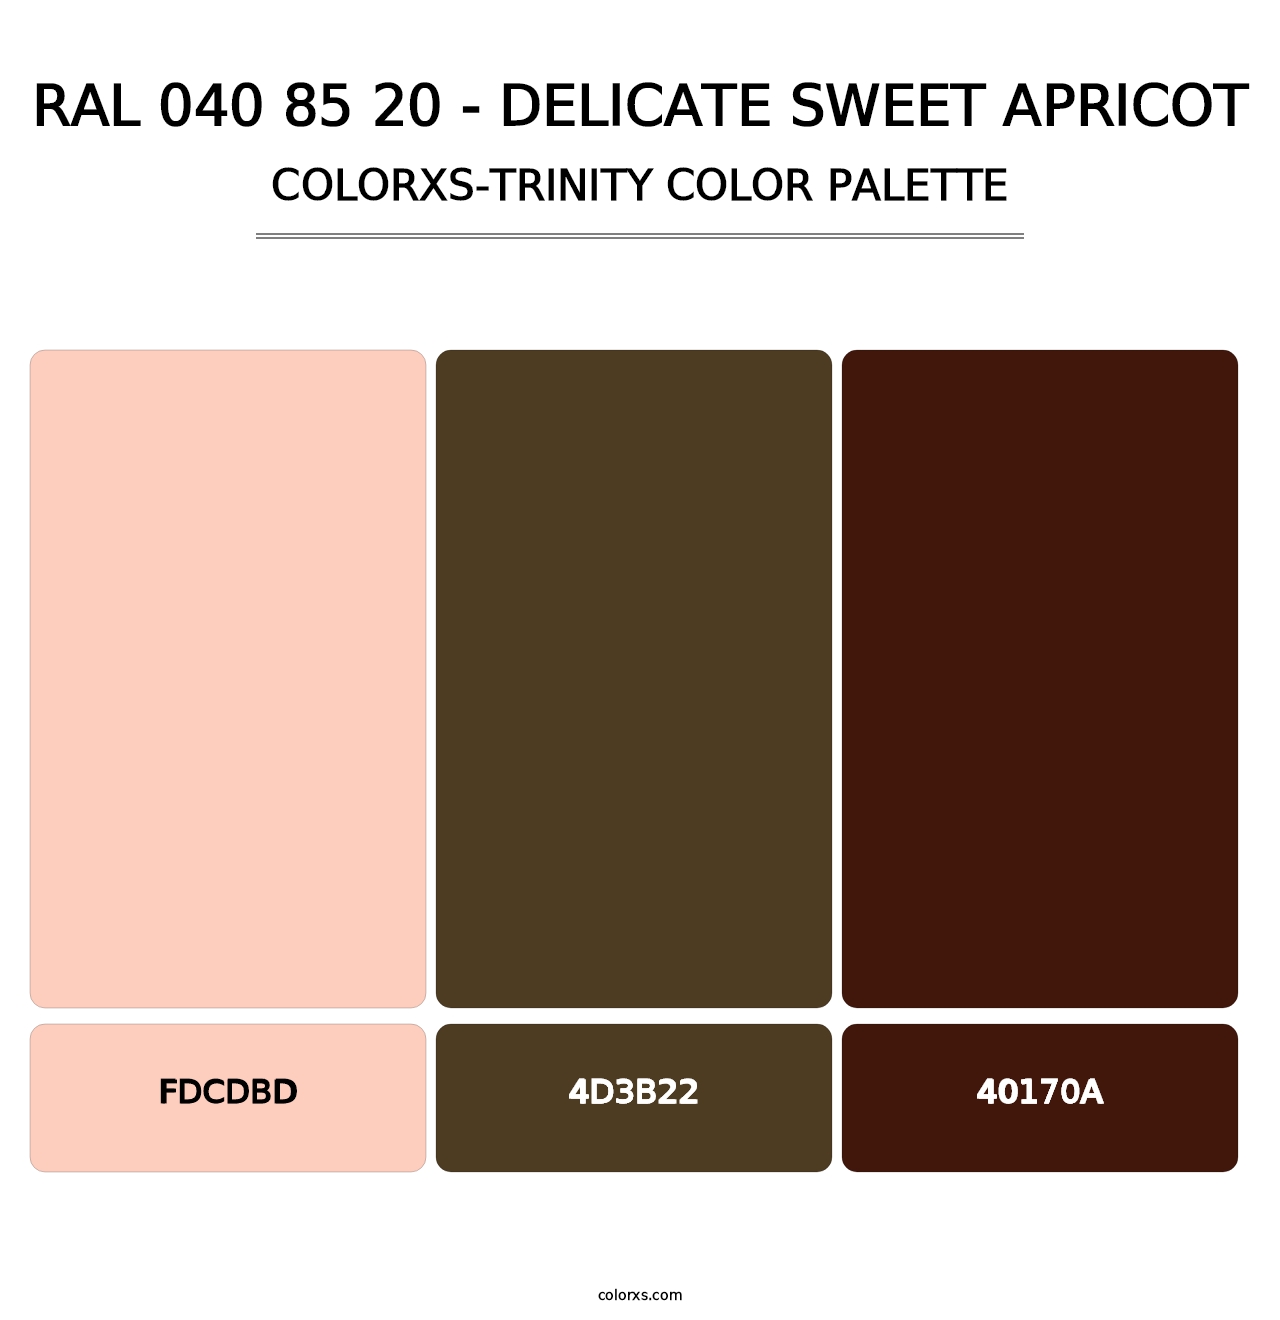 RAL 040 85 20 - Delicate Sweet Apricot - Colorxs Trinity Palette